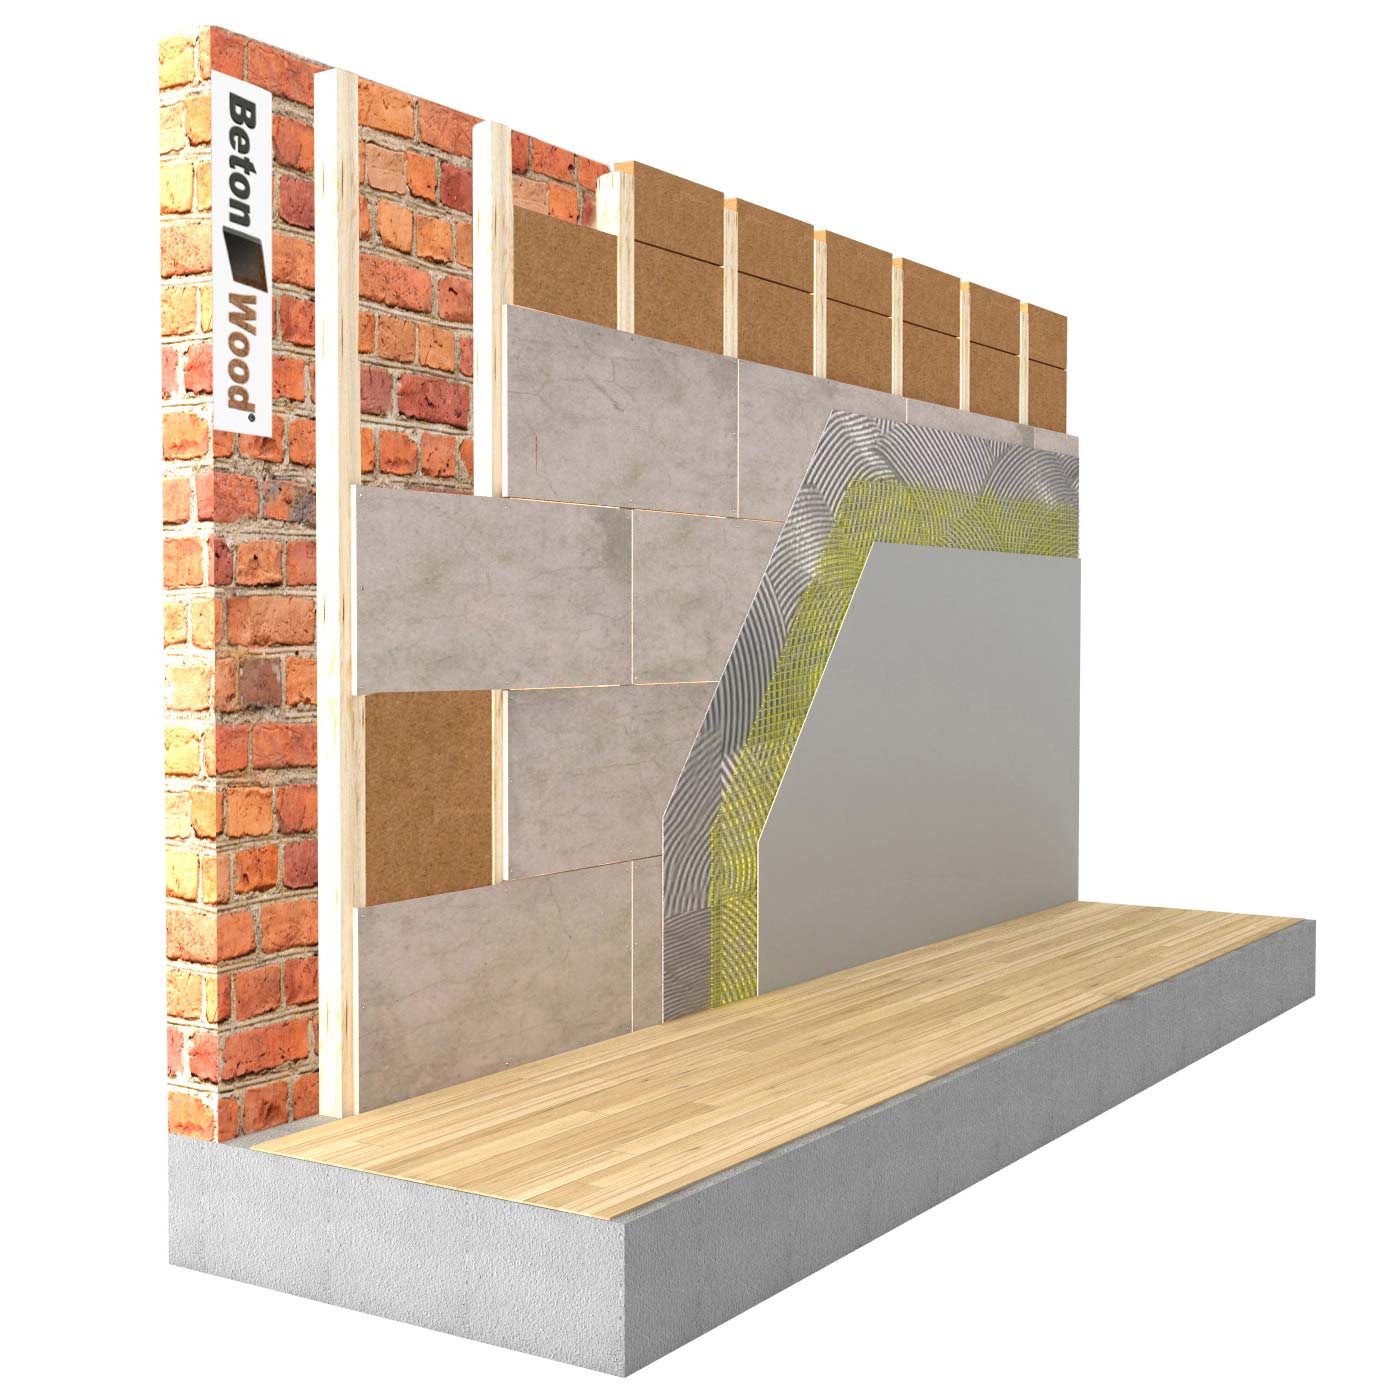 Internal insulation system in Wood fiber and cement bonded particle board